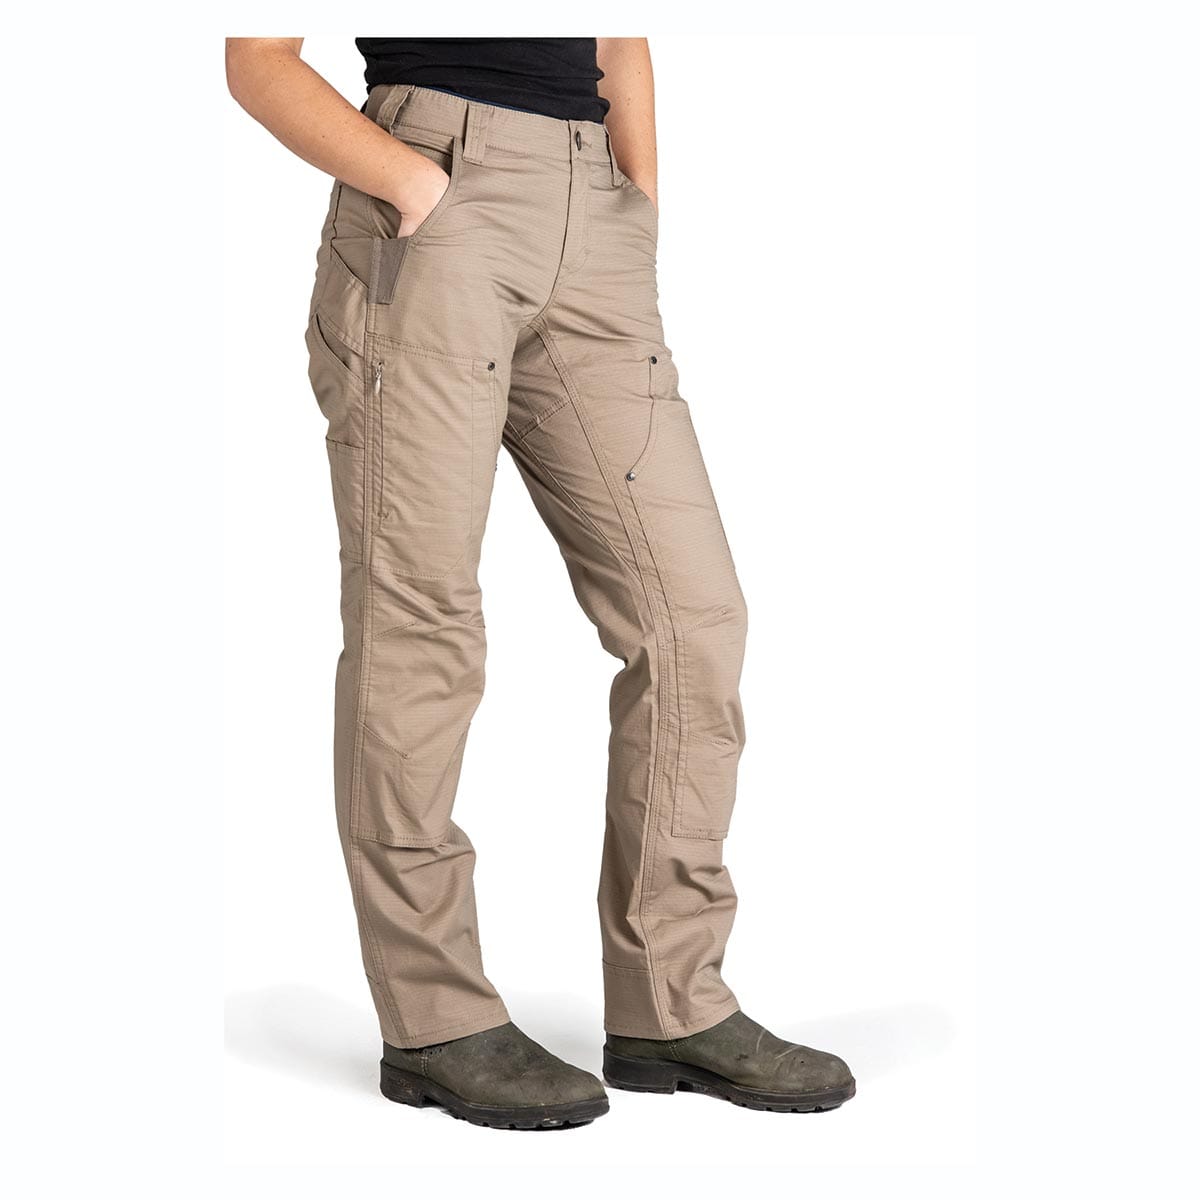 Tactical Pants for Women Skinny Stretch Cargo Pants High Waisted Straight  Leg Pants Bound Feet Ripstop Cargo Trousers